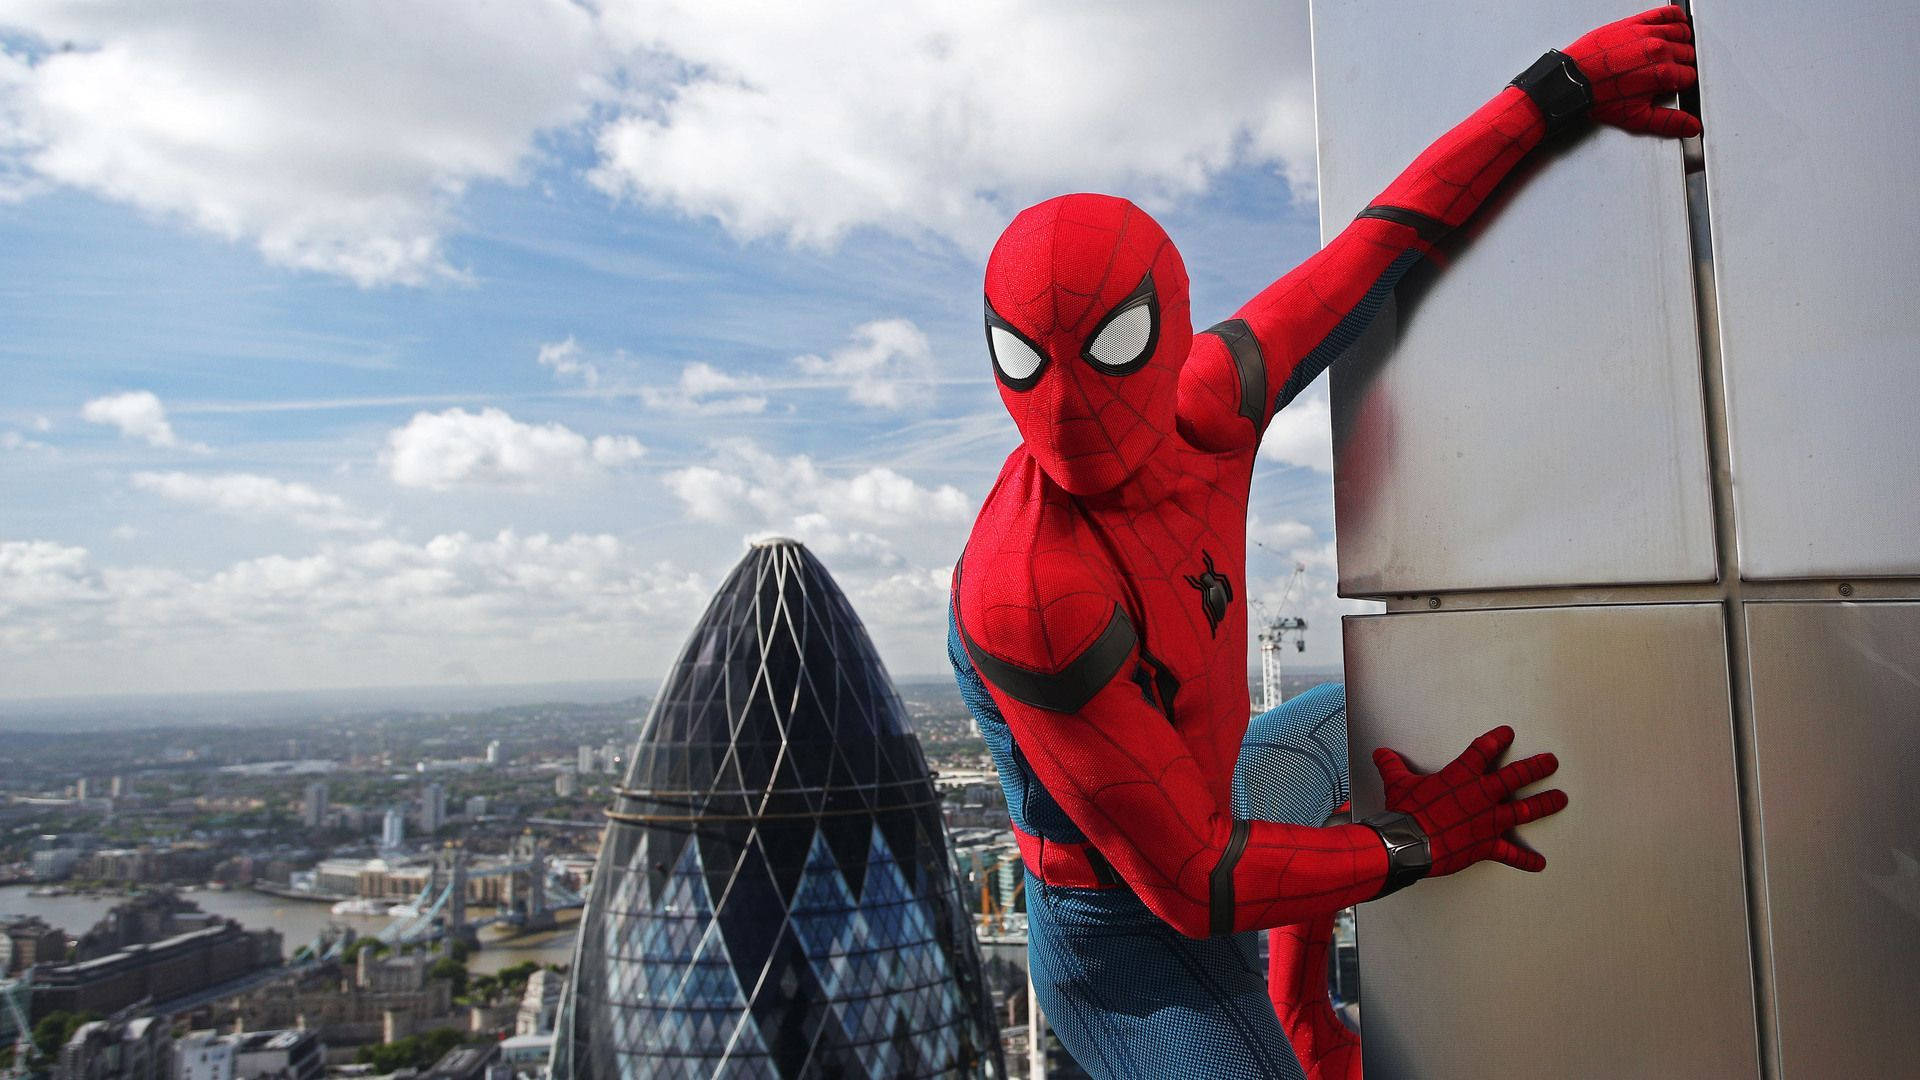 Spiderman And Gherkin Tower Background